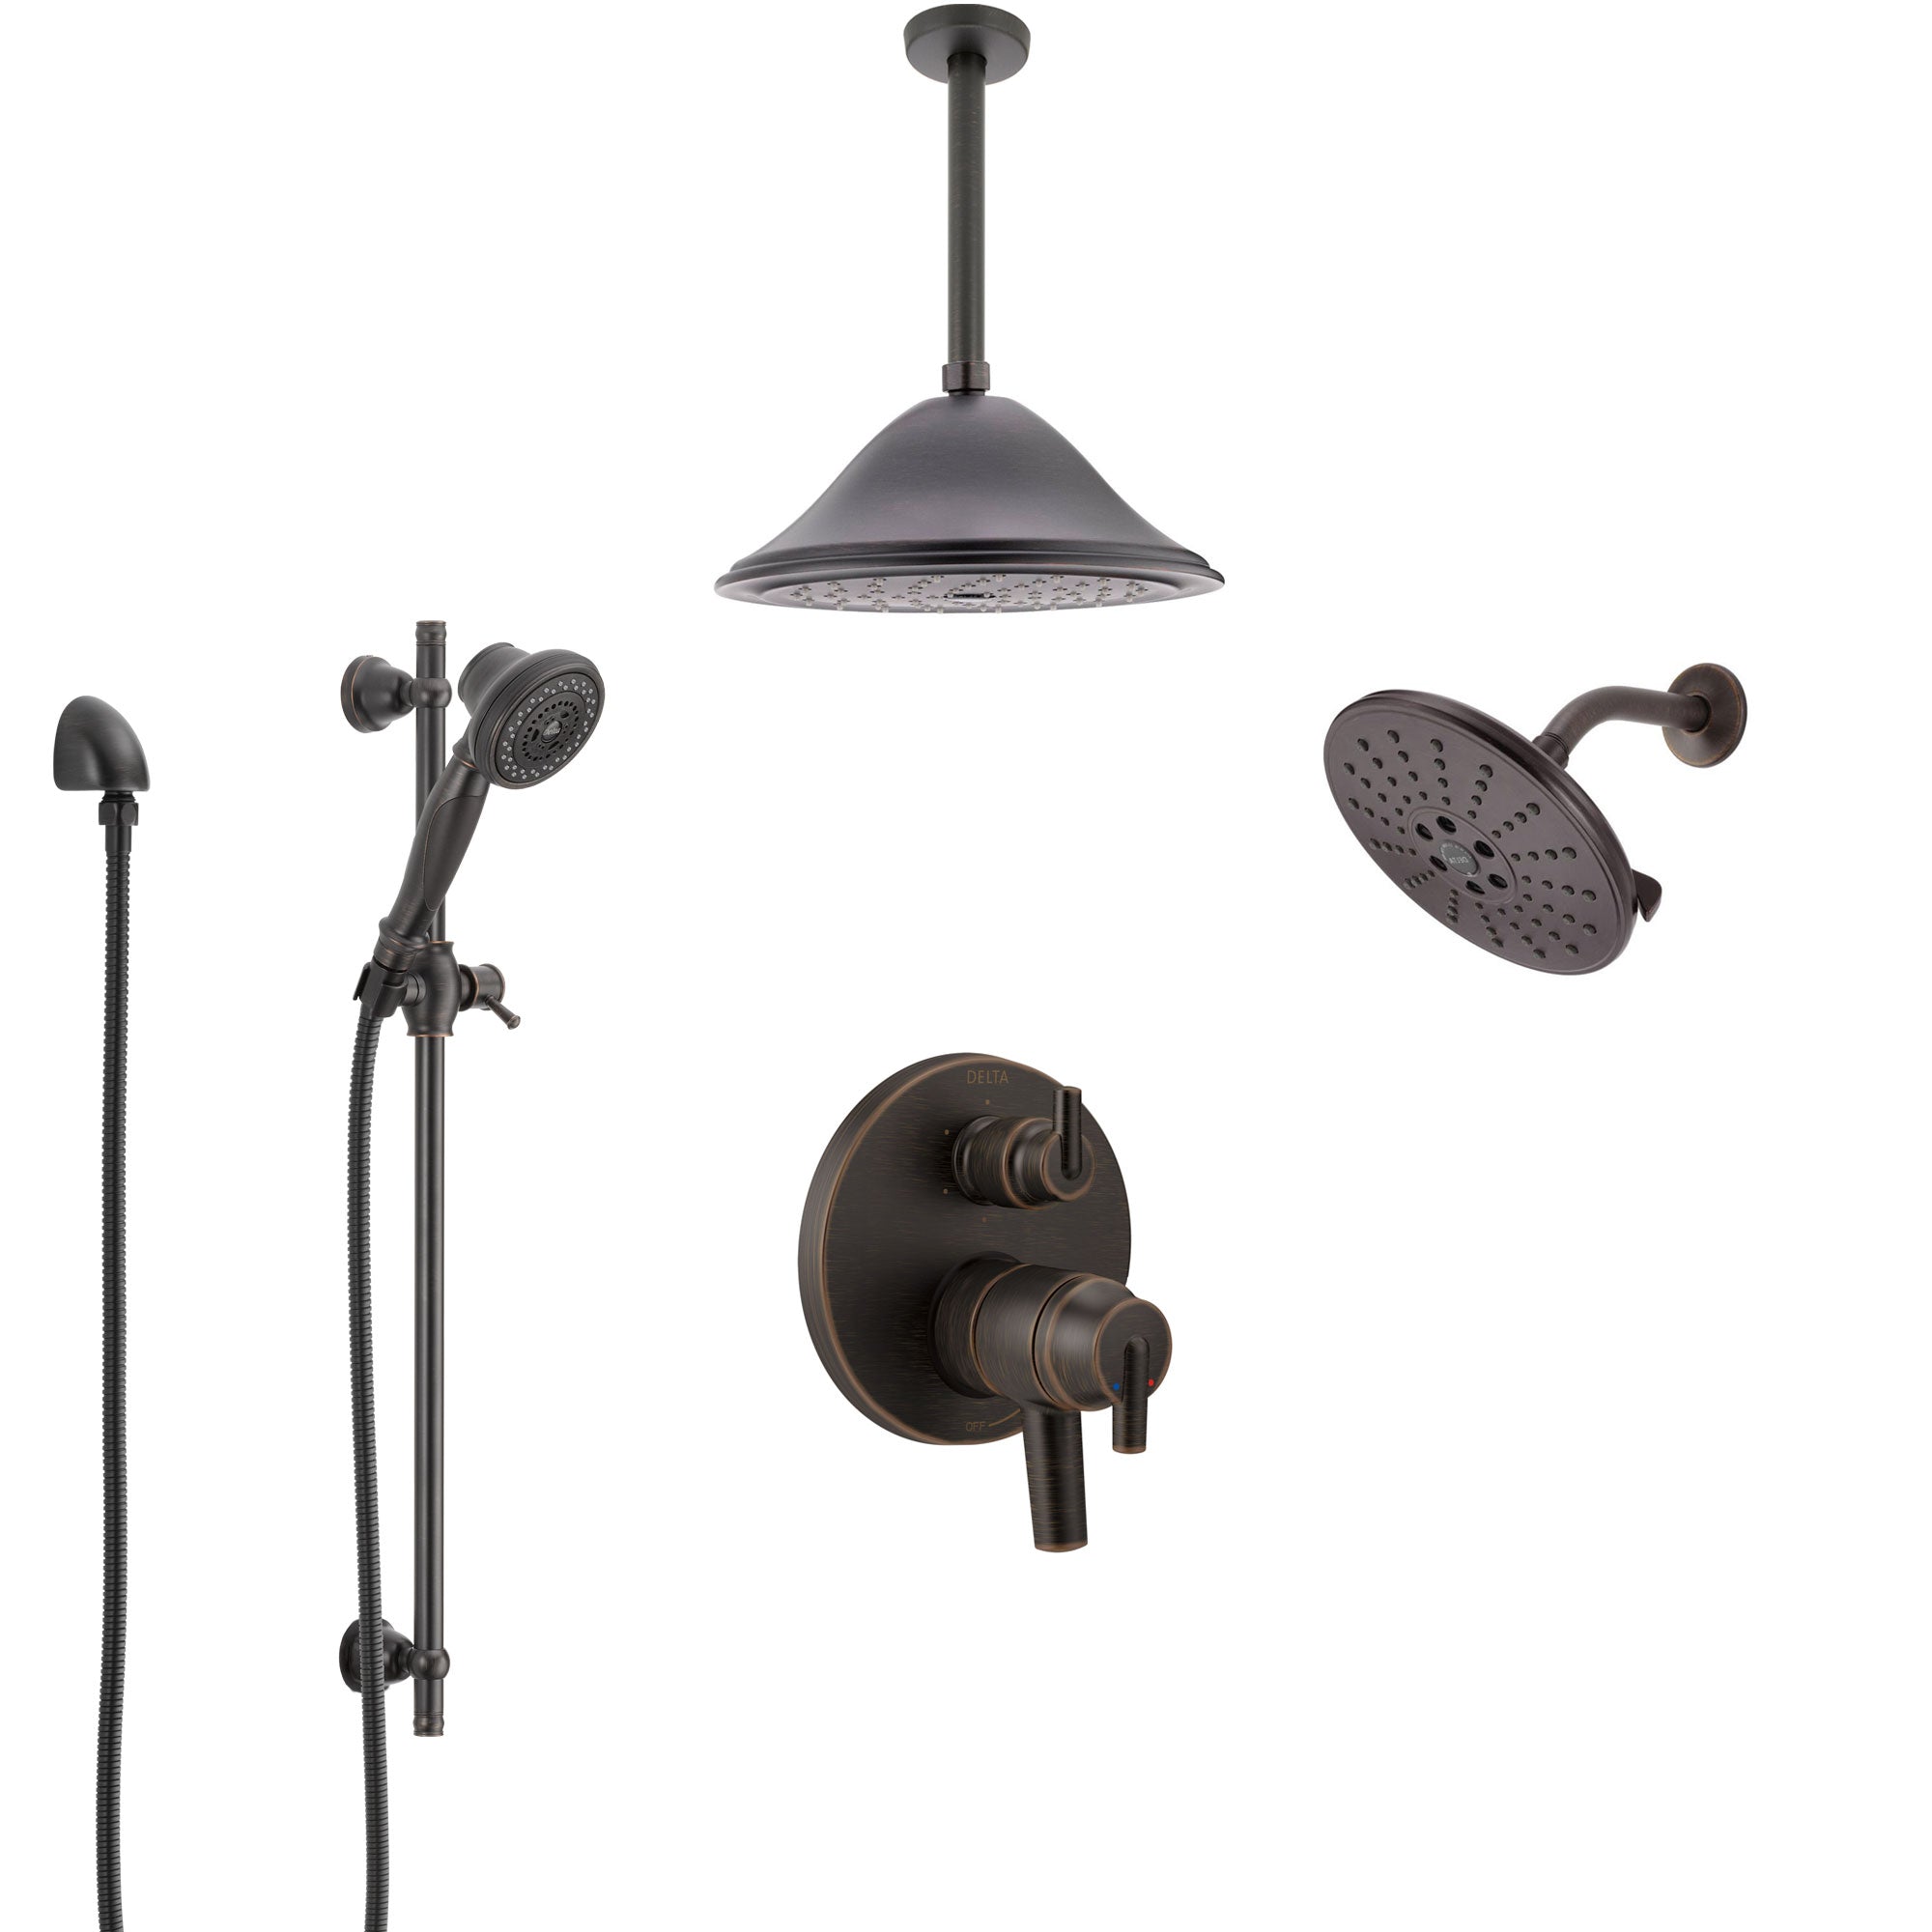 Delta Trinsic Venetian Bronze Shower System with Dual Control Handle, Integrated Diverter, Showerhead, Ceiling Showerhead, and Hand Shower SS27959RB6